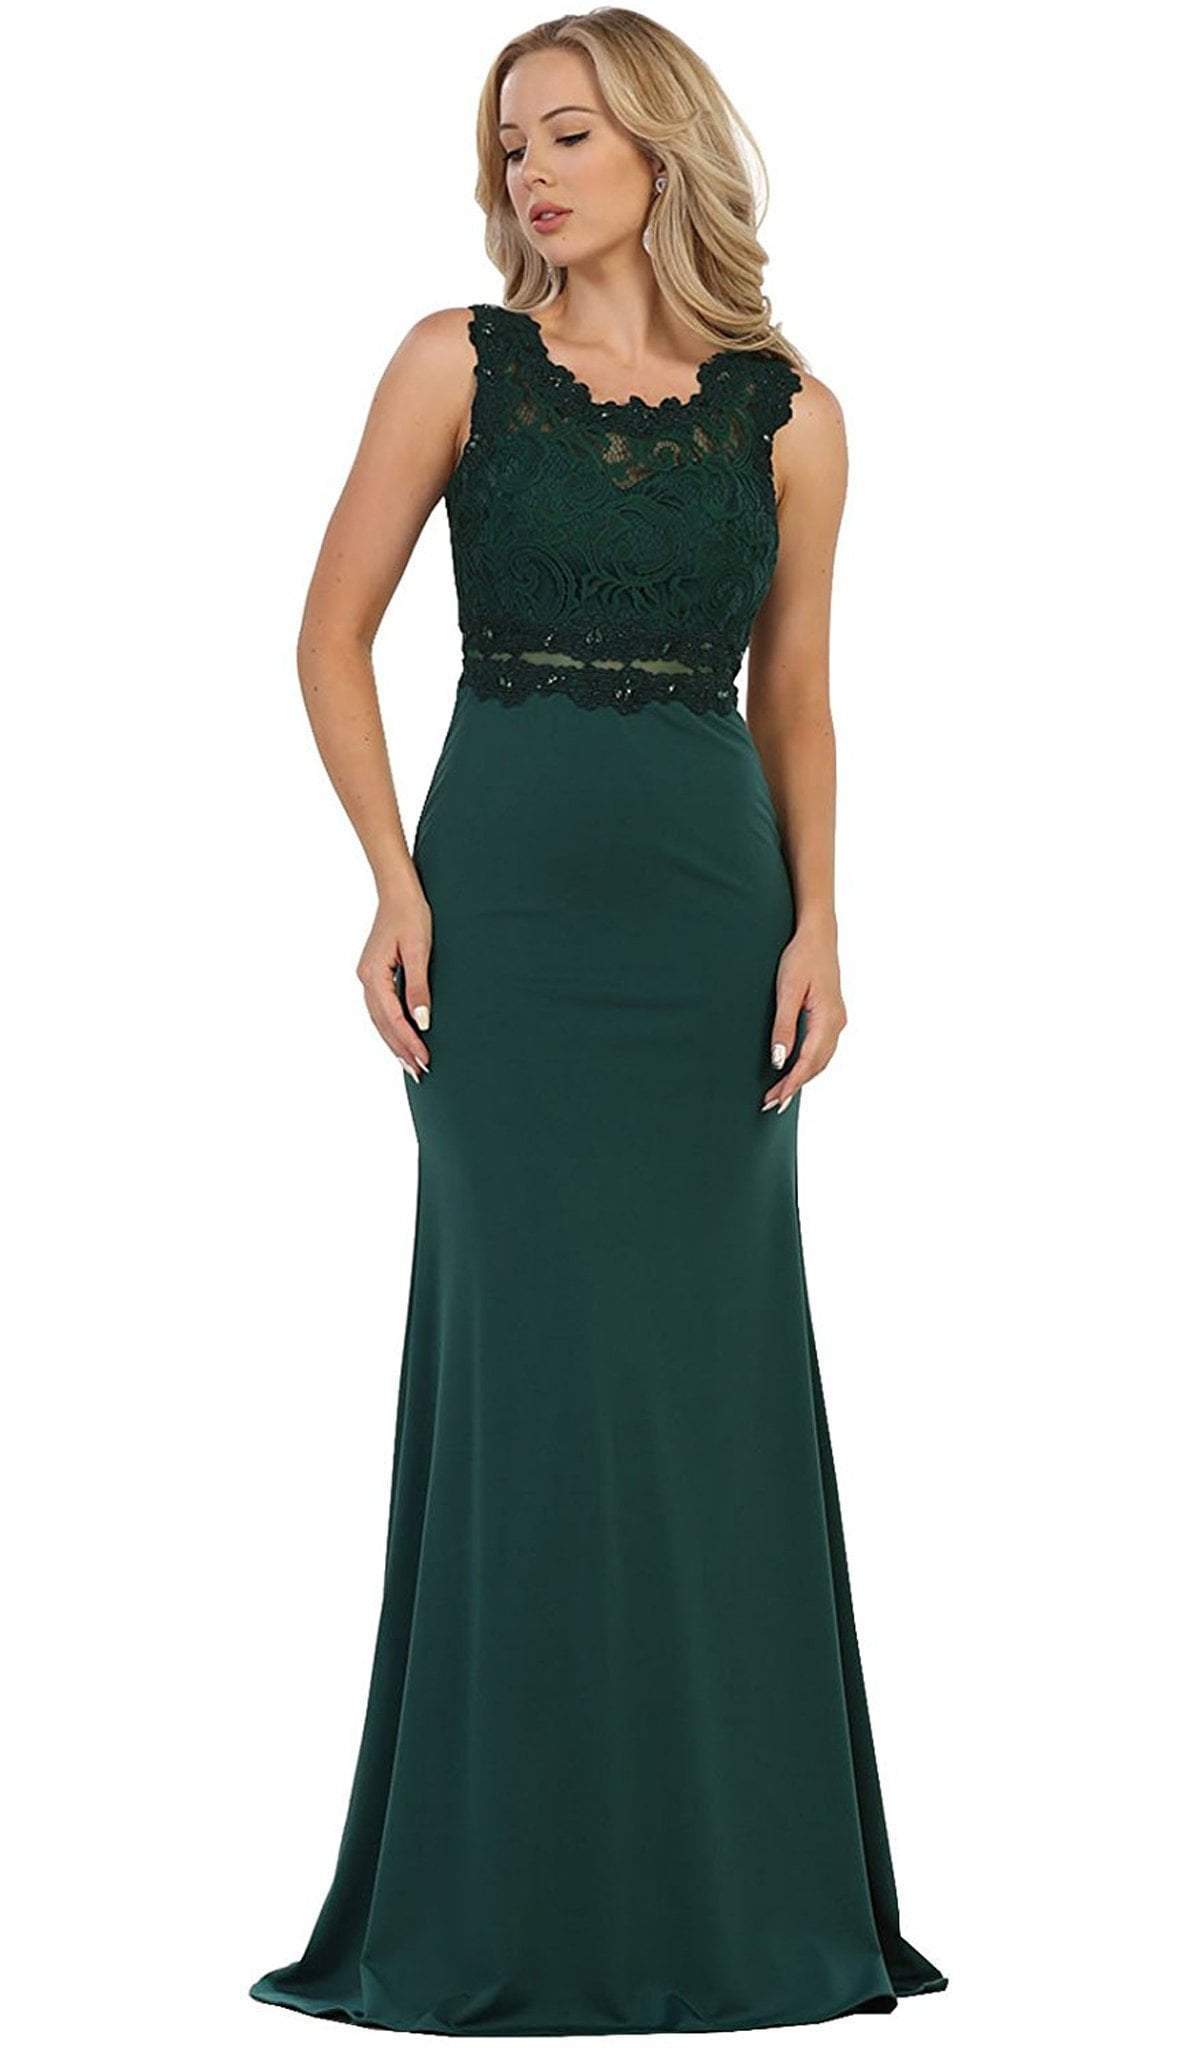 May Queen - Lace Bodice Illusion Paneled Sheath Evening Gown Special Occasion Dress 4 / Hunter-Green